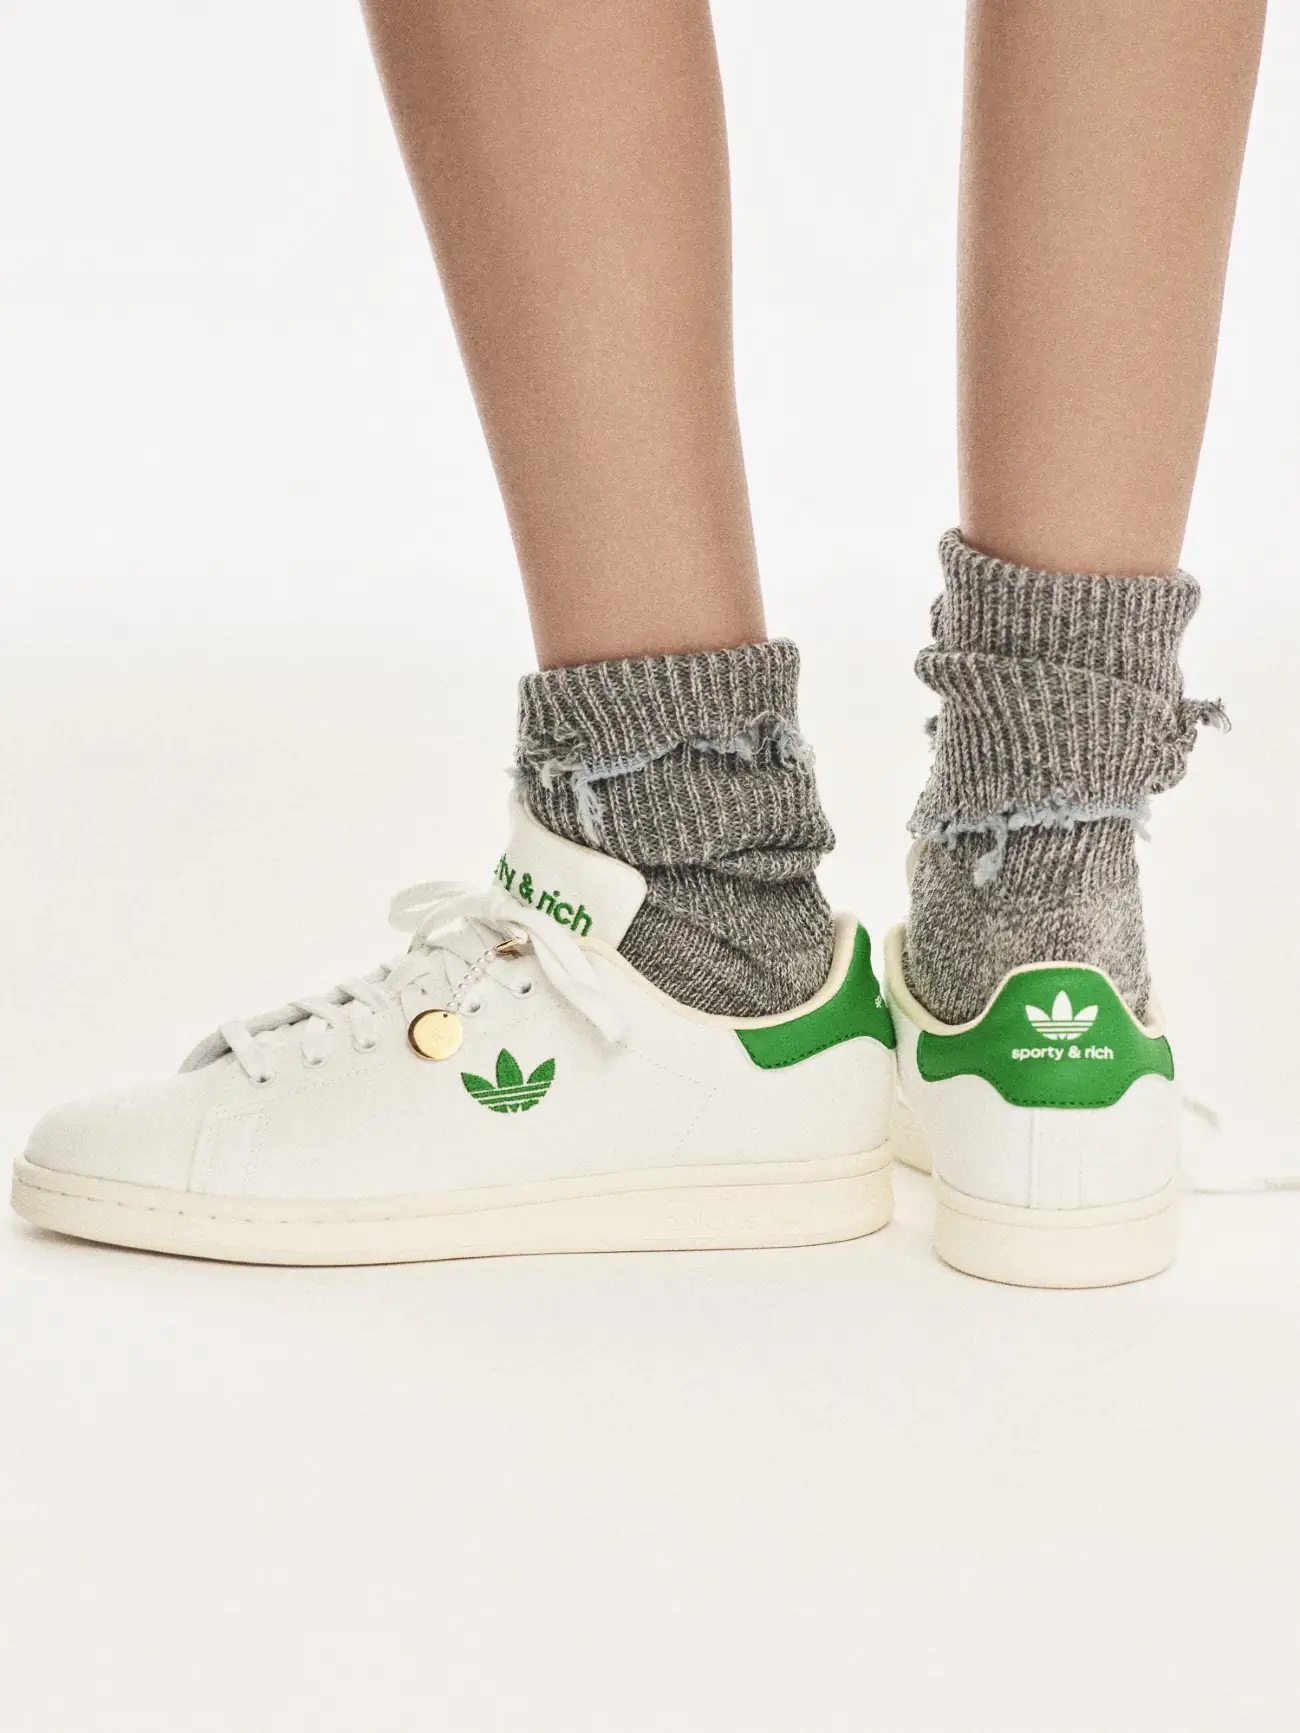 adidas Originals x Sporty & Rich launches third collection